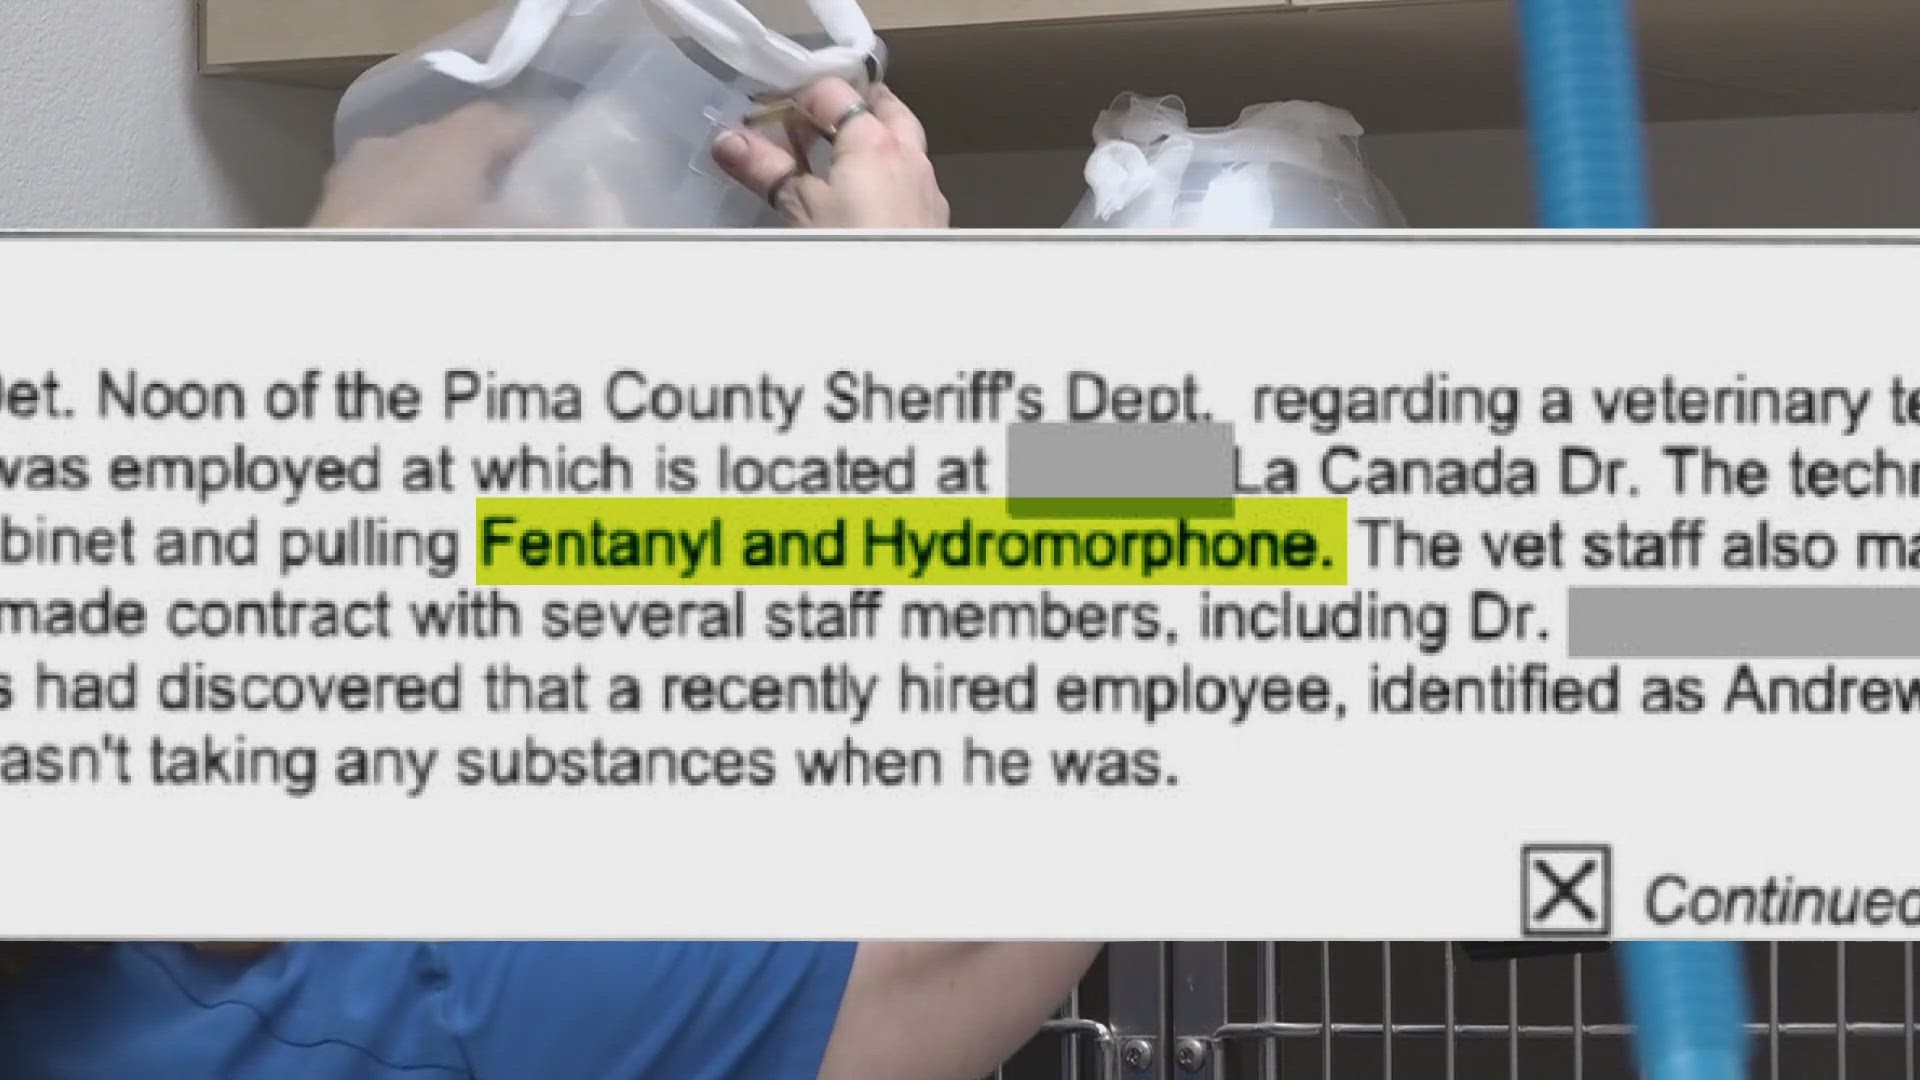 A vet technician in Pima County is suspected of stealing drugs used for animal surgeries and replacing them with saline.